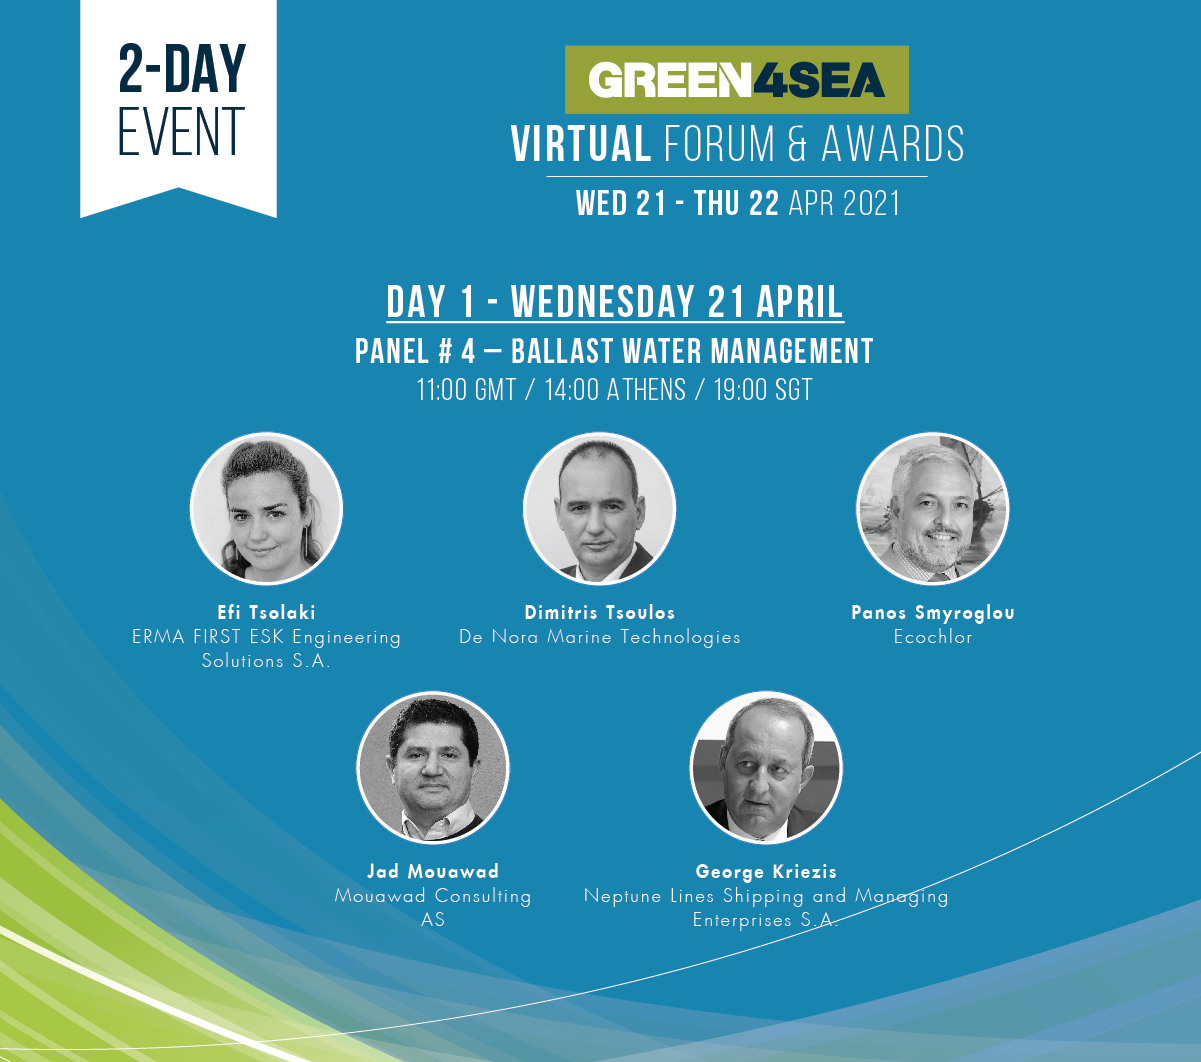 Panos Smyroglou is speaking at Green4Sea